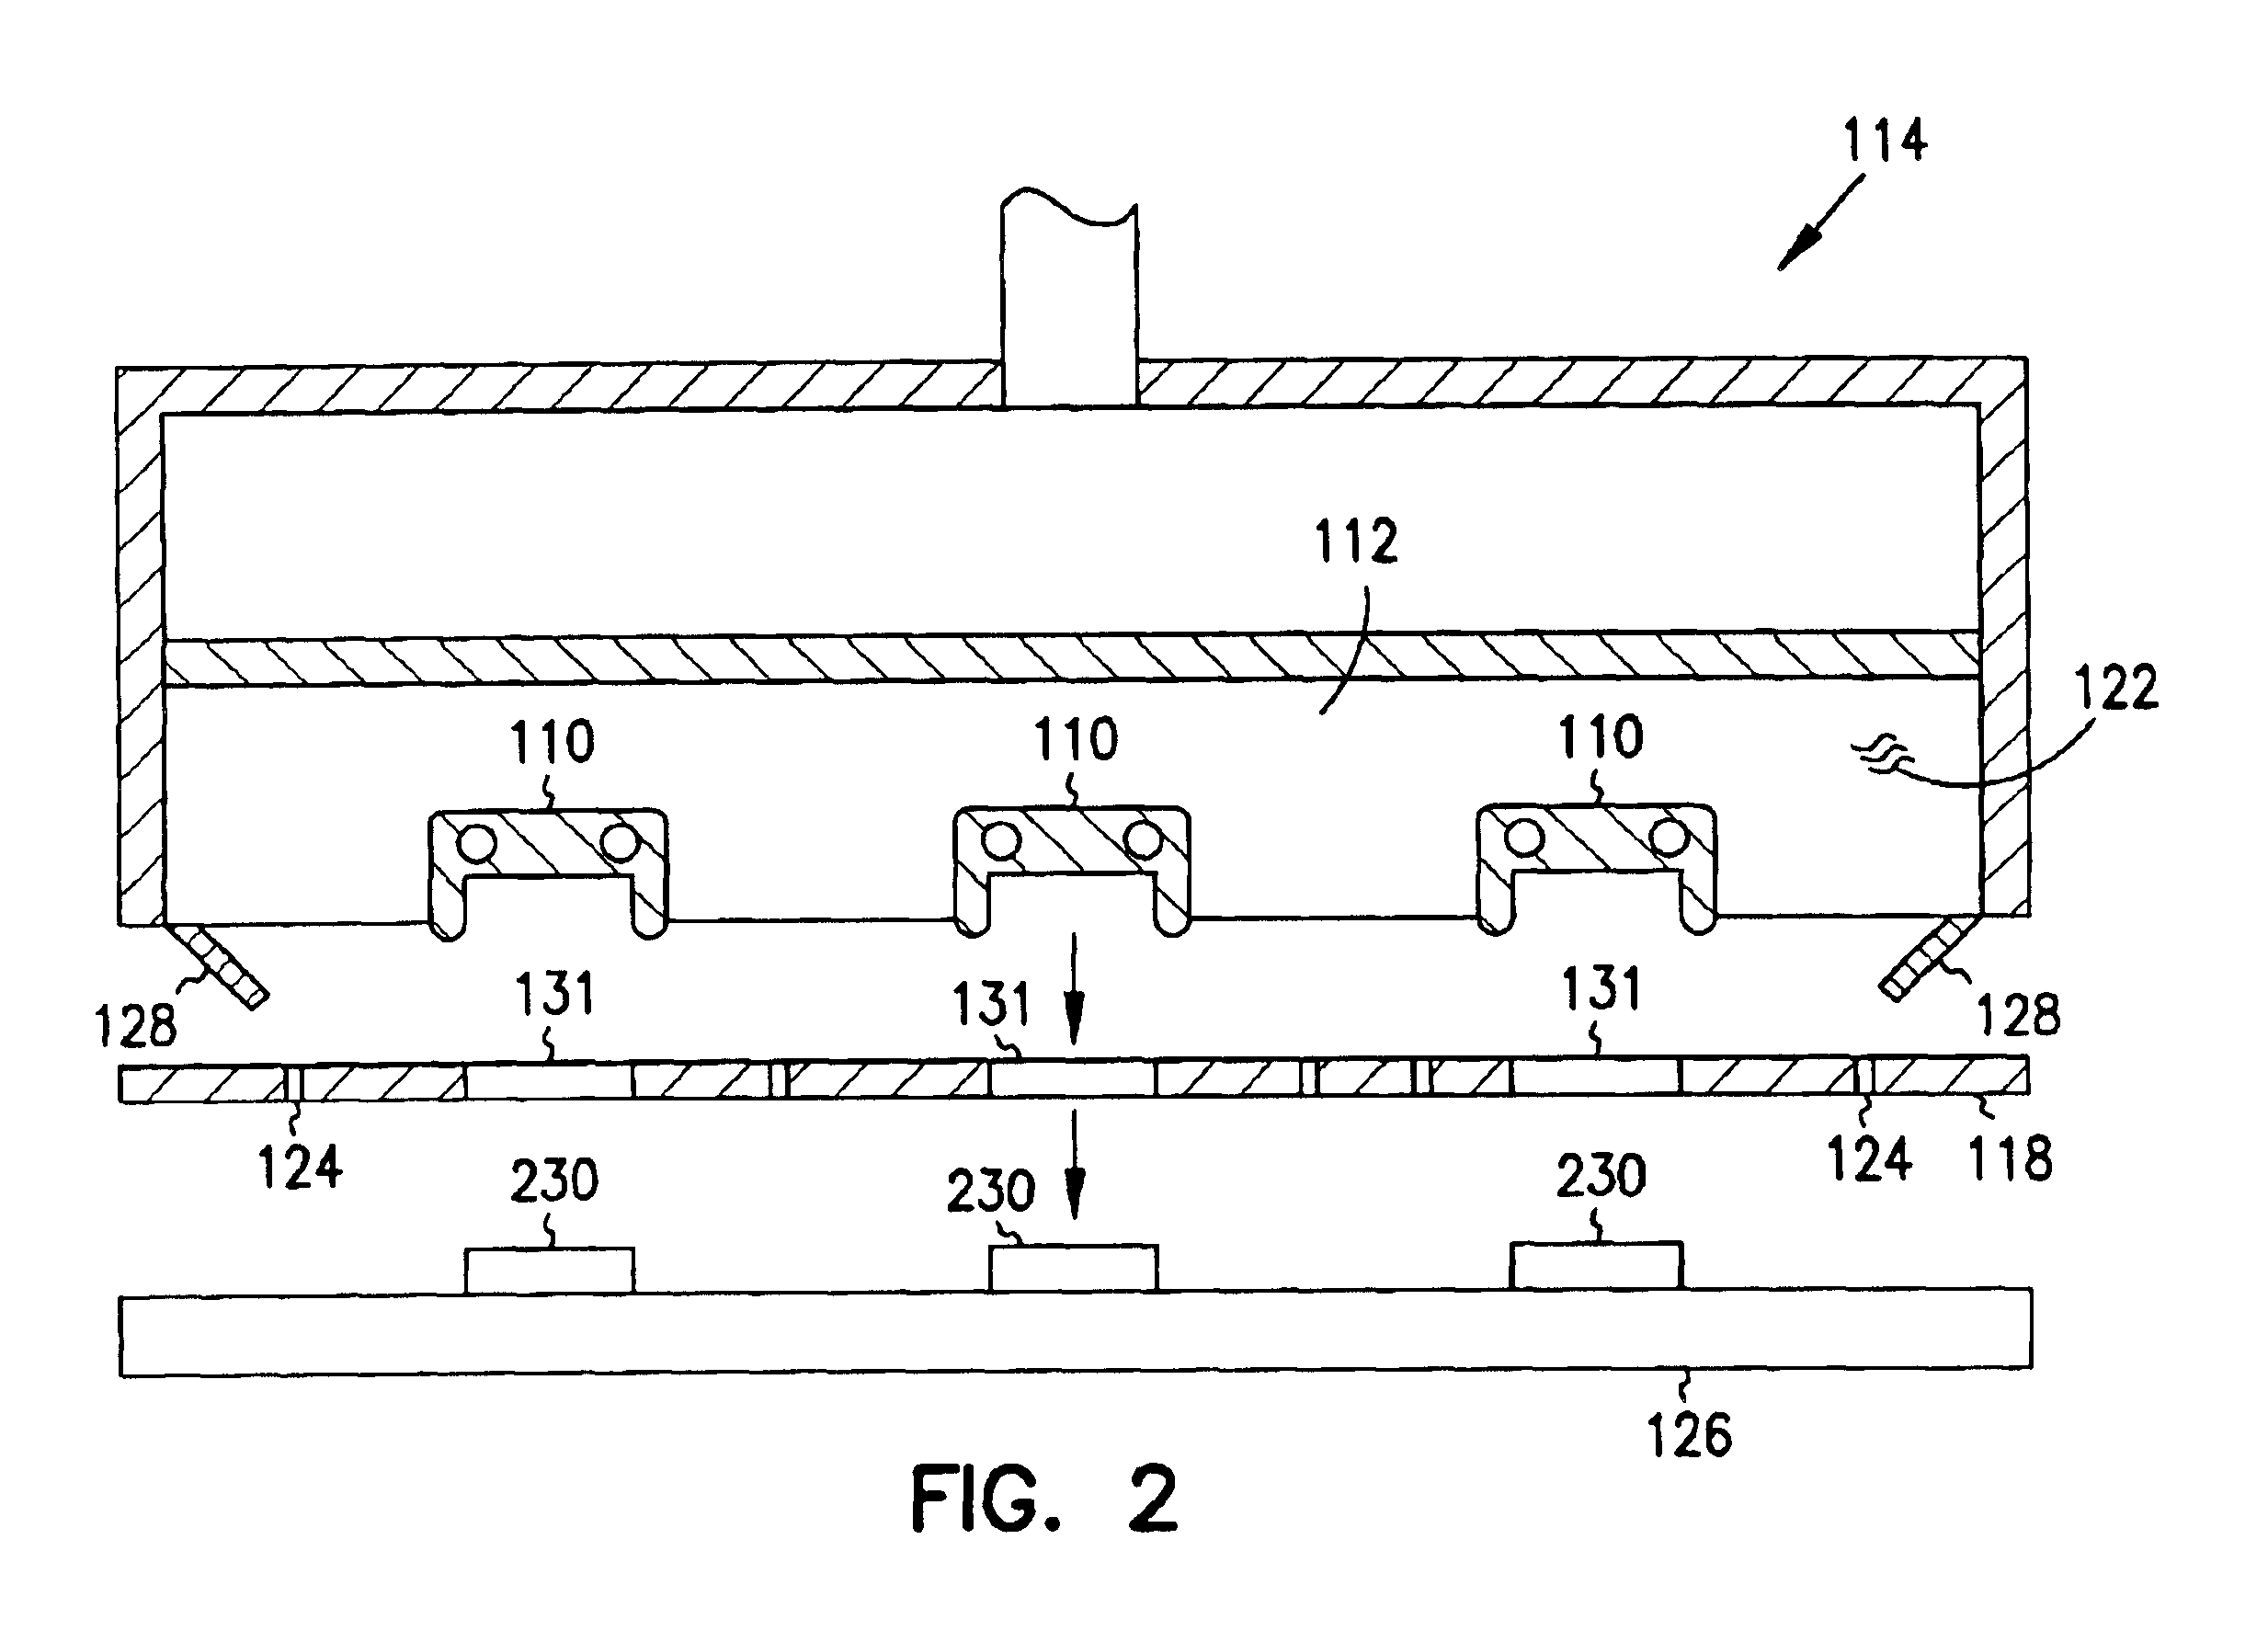 Methods for manufacturing printed circuit boards using a partial printing process and apparatus